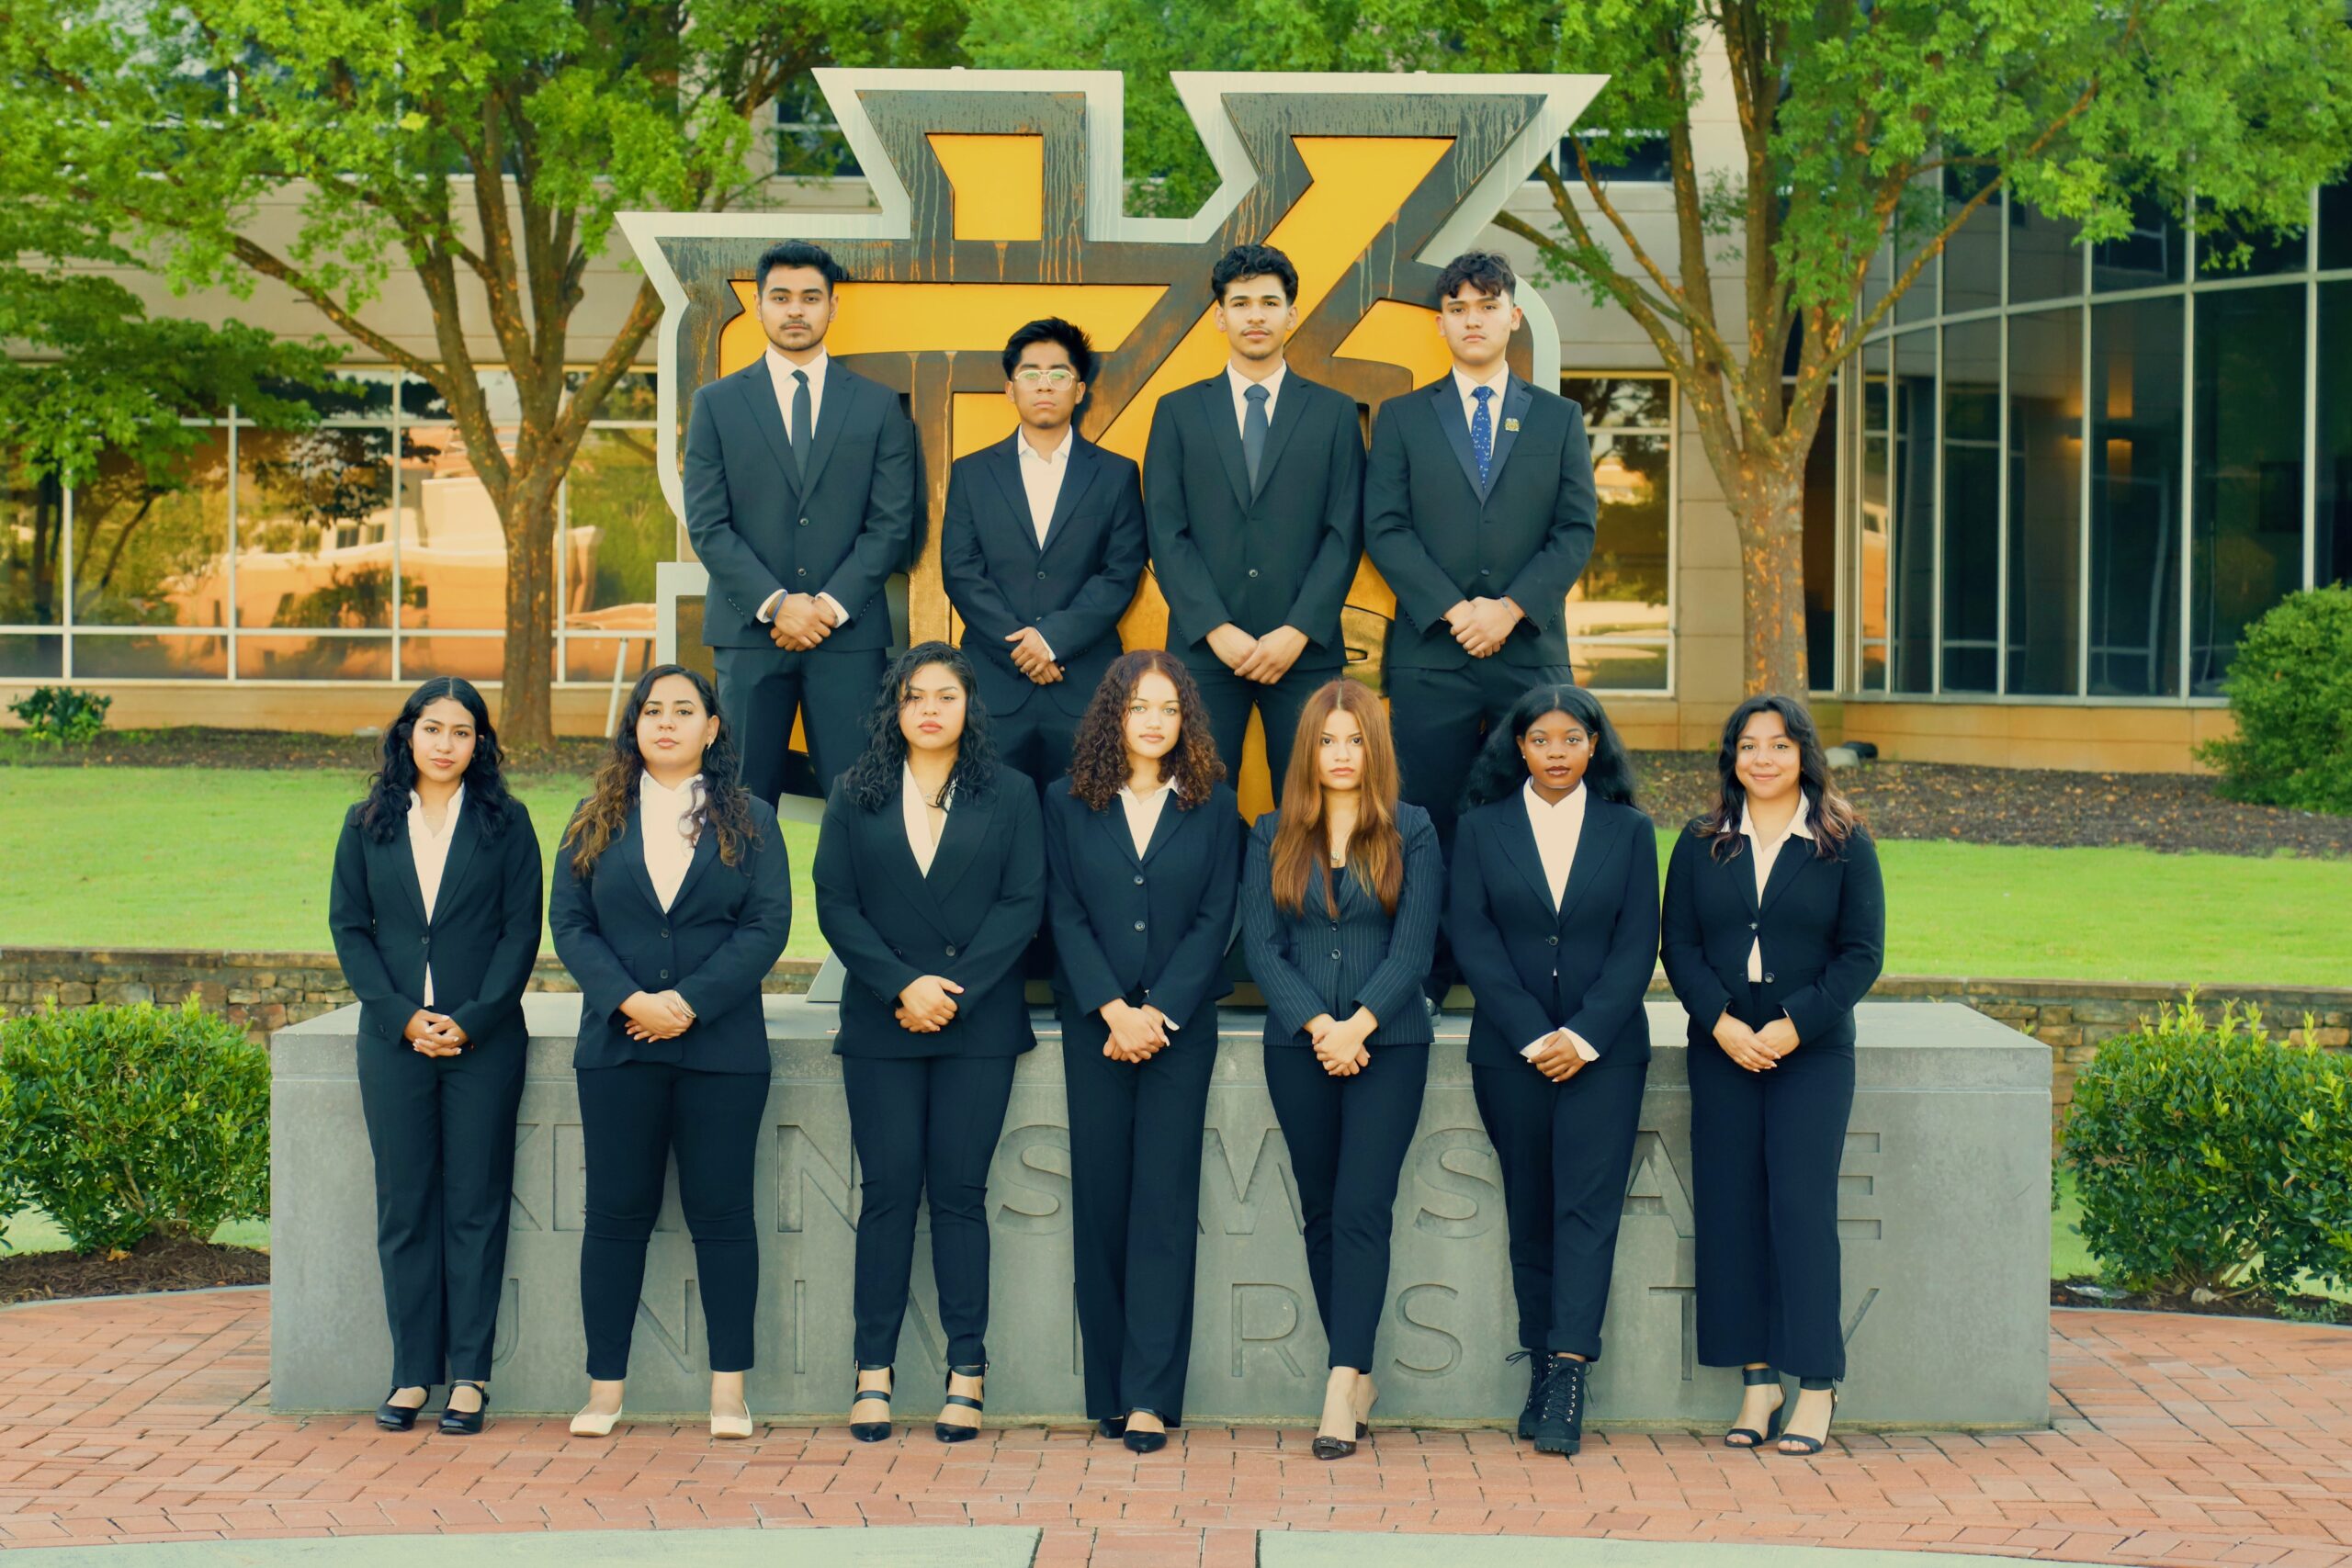 ALPFA members gathered in front of the KSU sign.